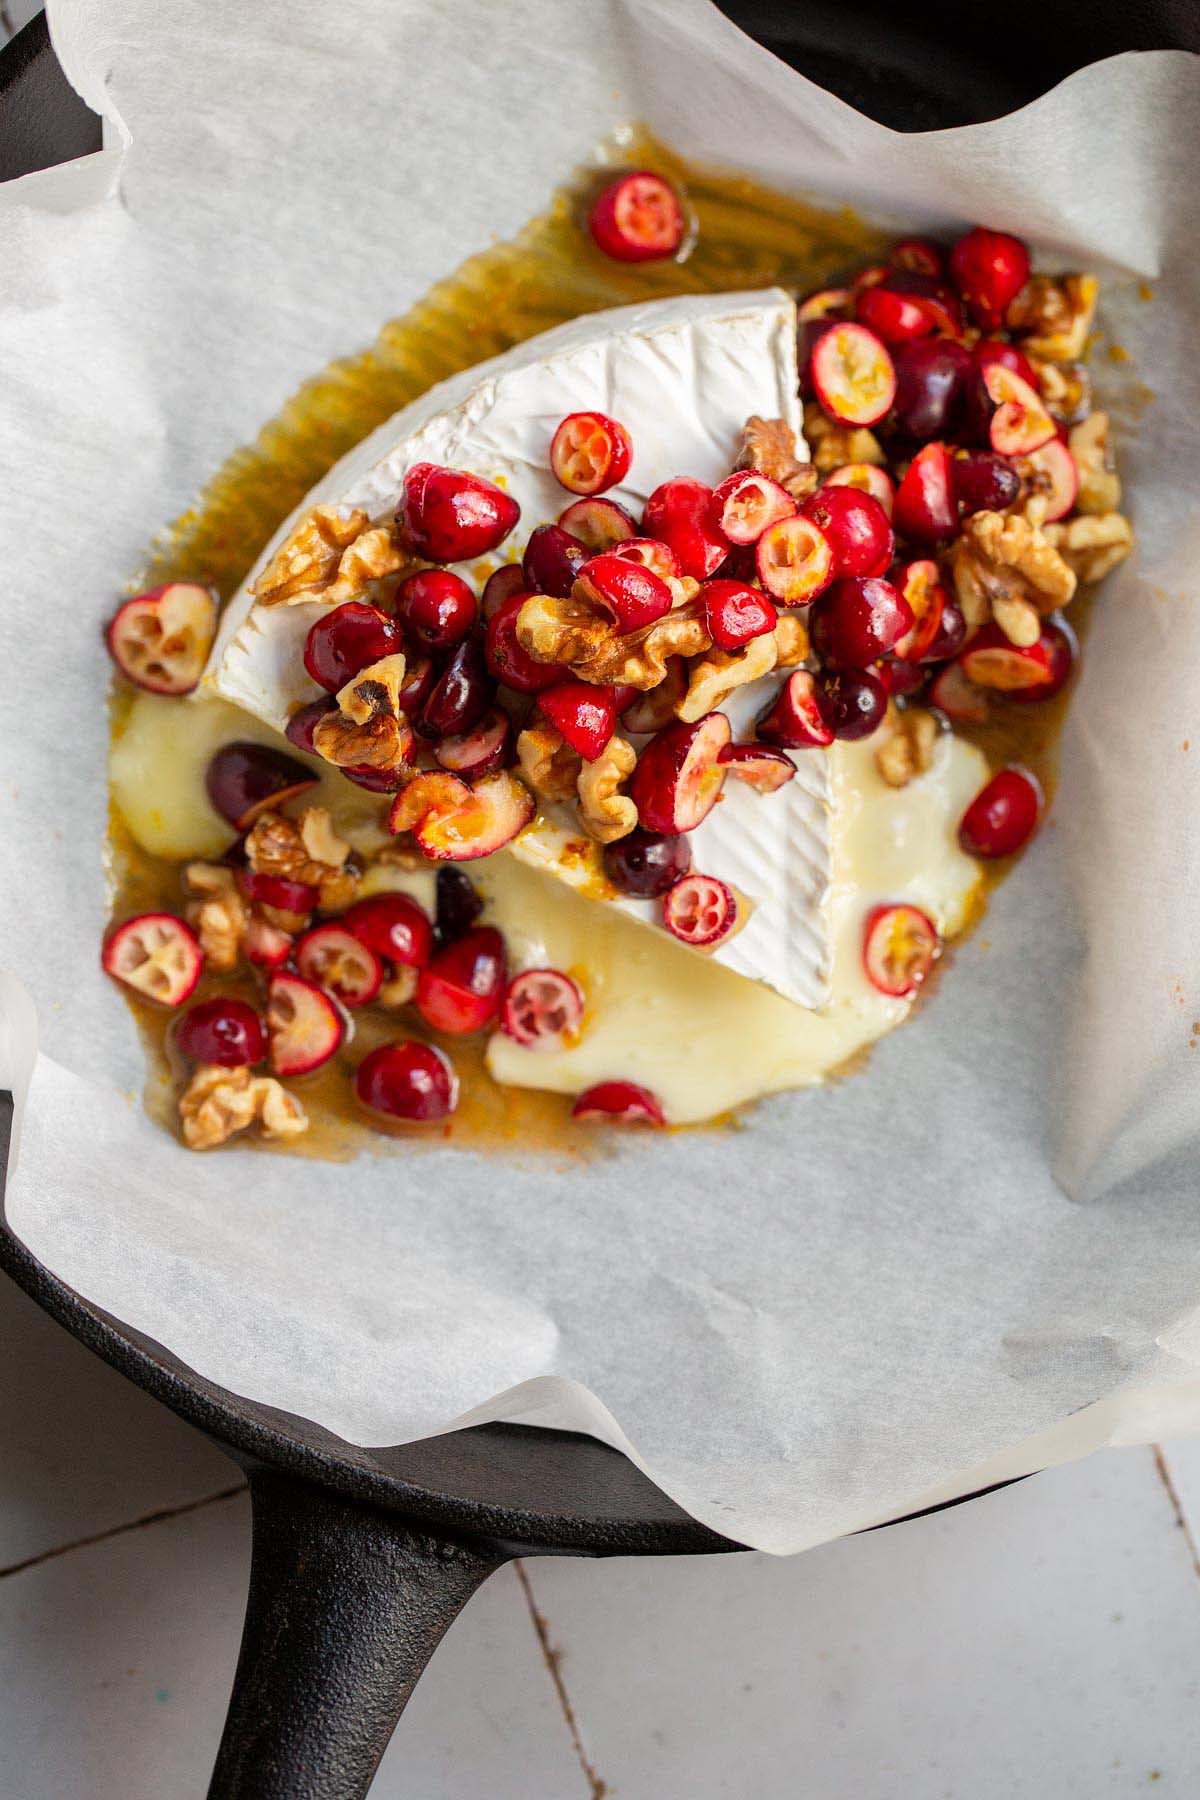 Baked brie with cranberries and walnuts